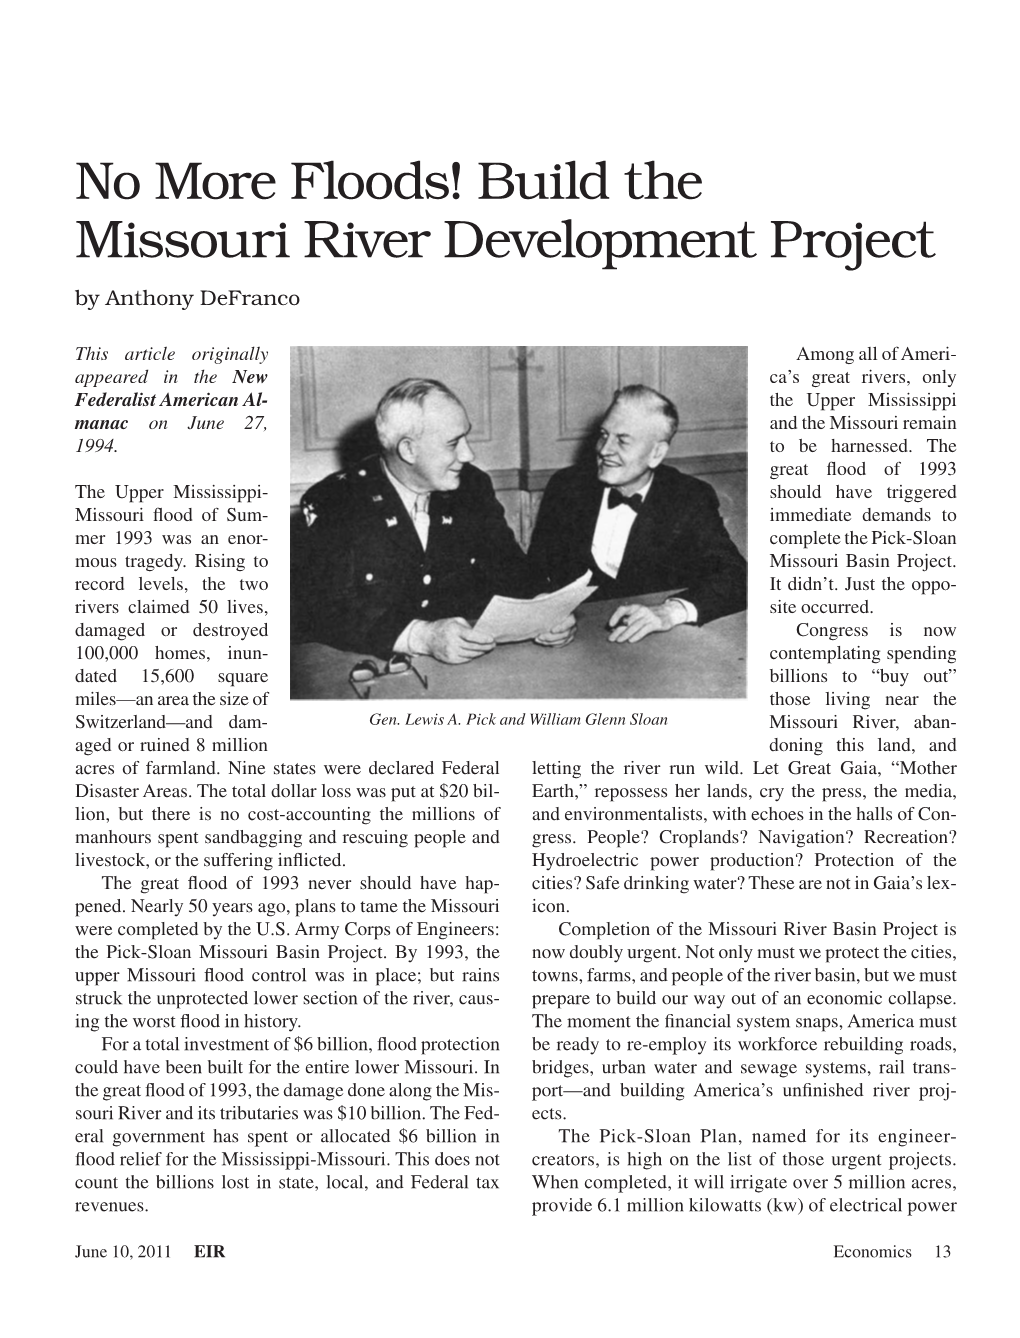 No More Floods! Build the Missouri River Development Project by Anthony Defranco